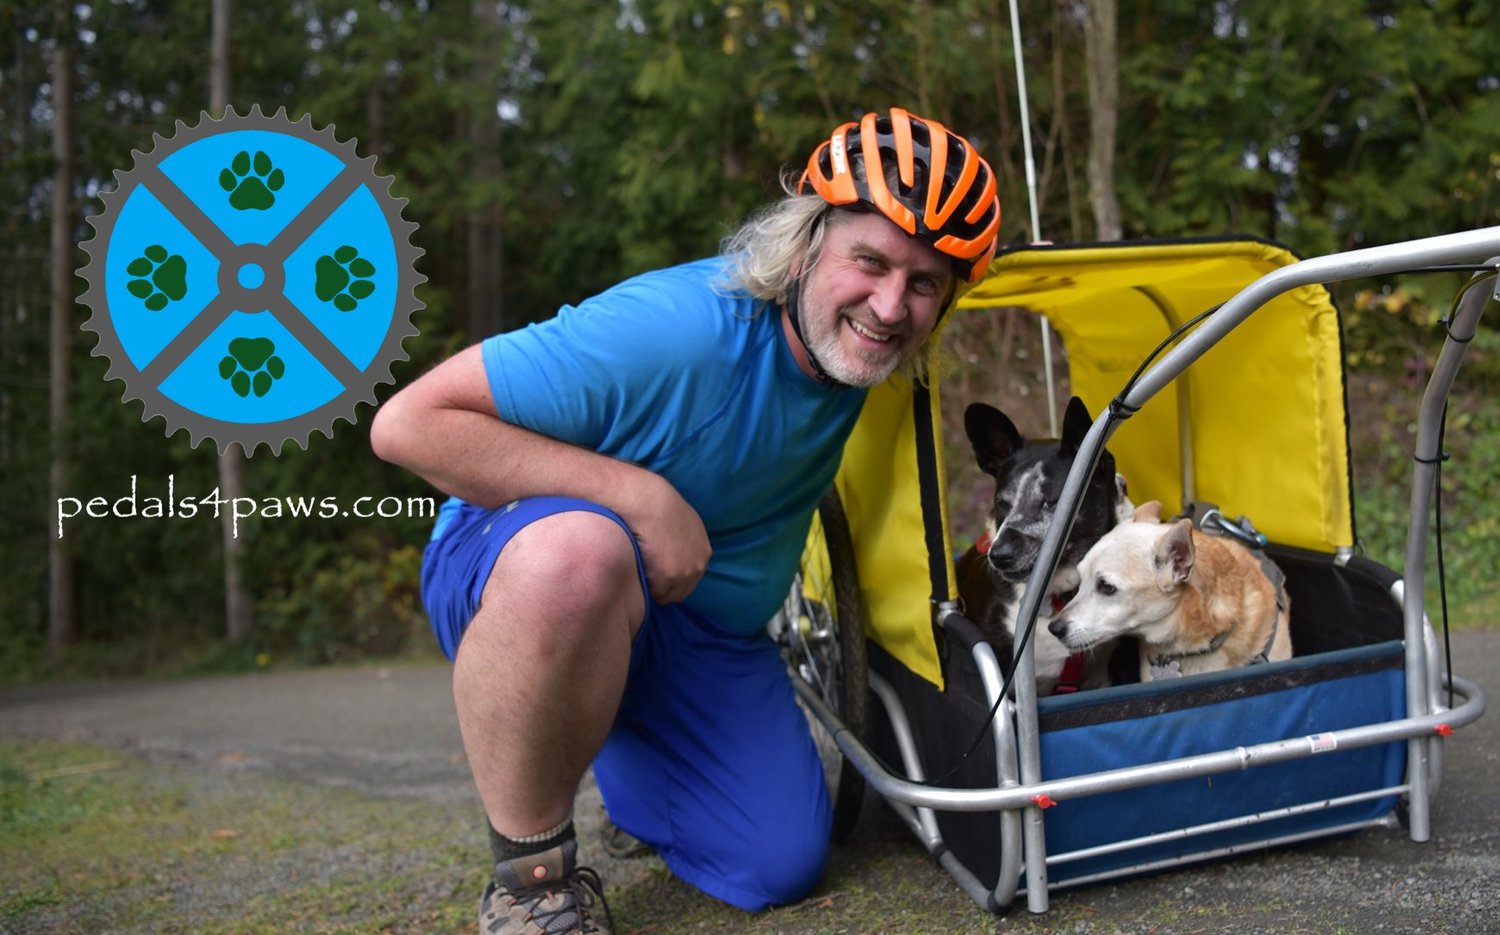 Pedals4Paws - Bike Touring With Dogs & Animal Welfare Organization